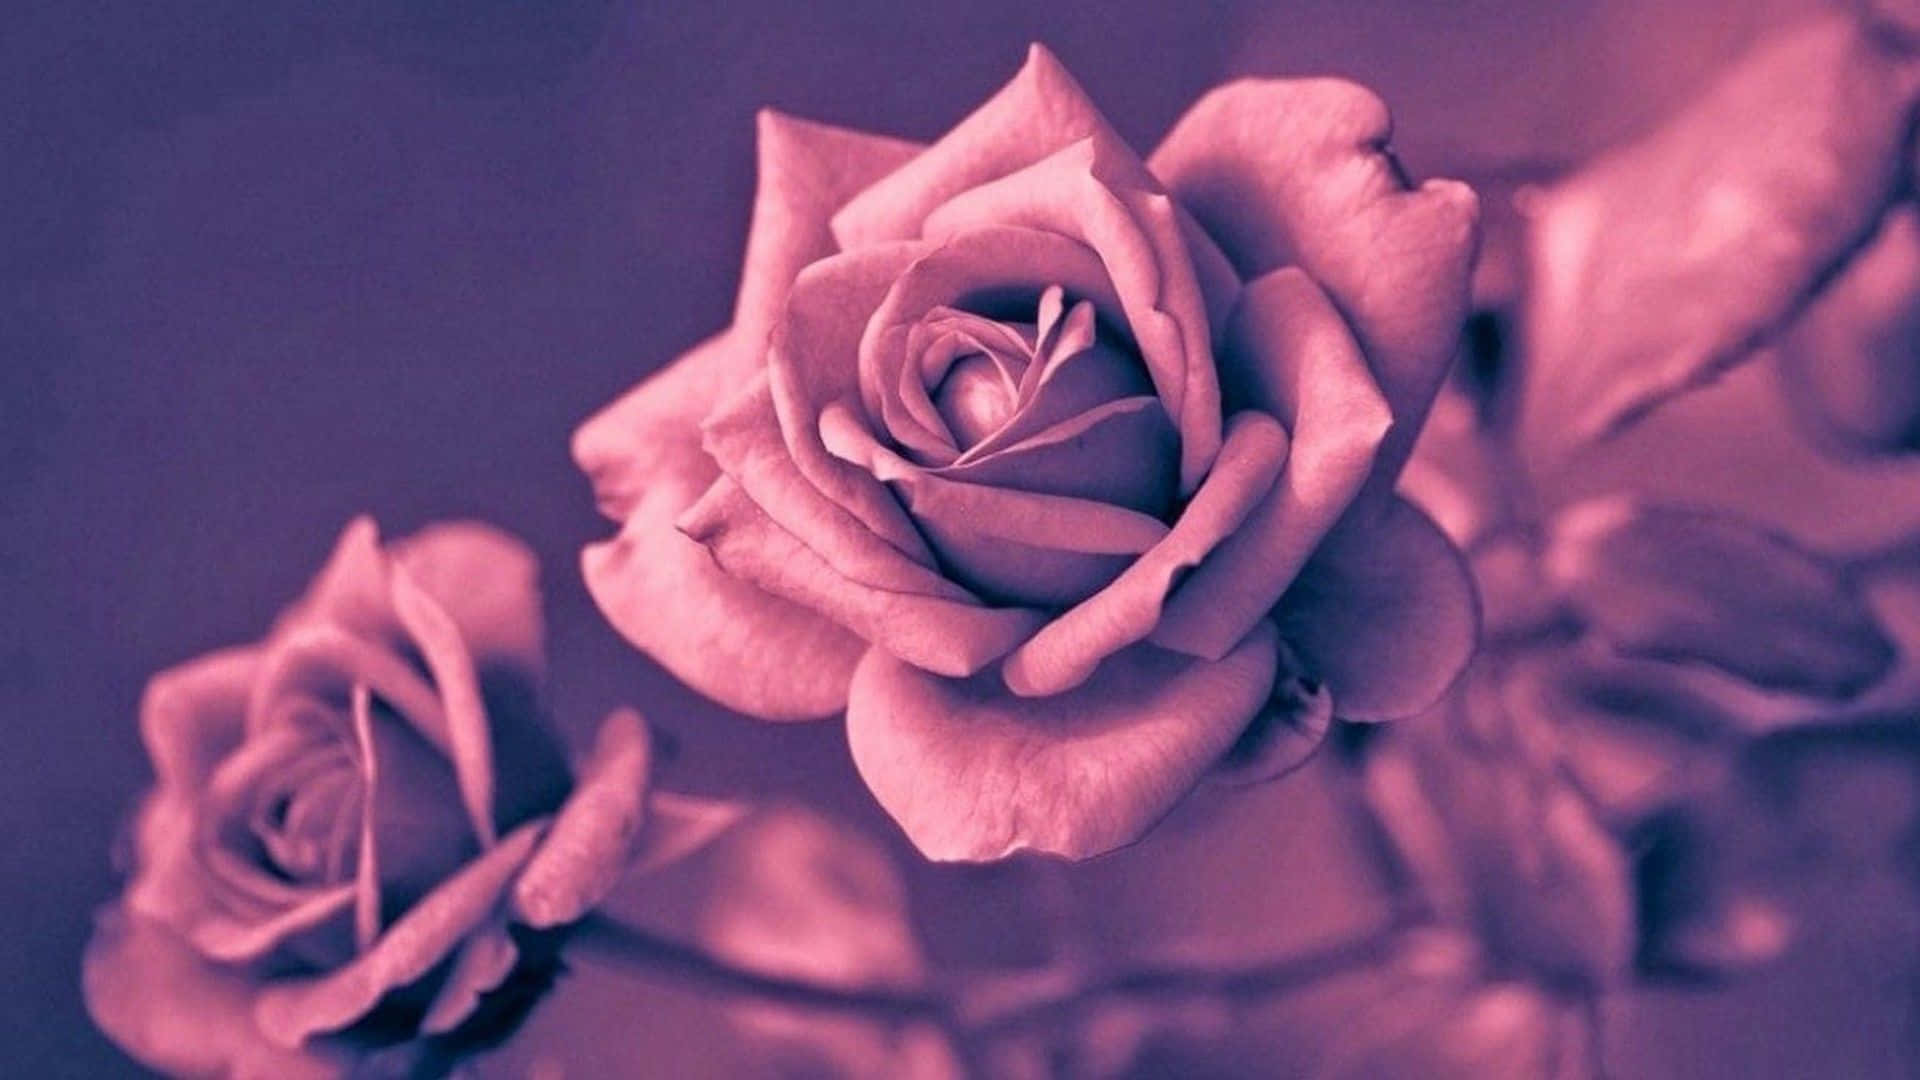 A Purple Rose Is Shown In The Background Wallpaper